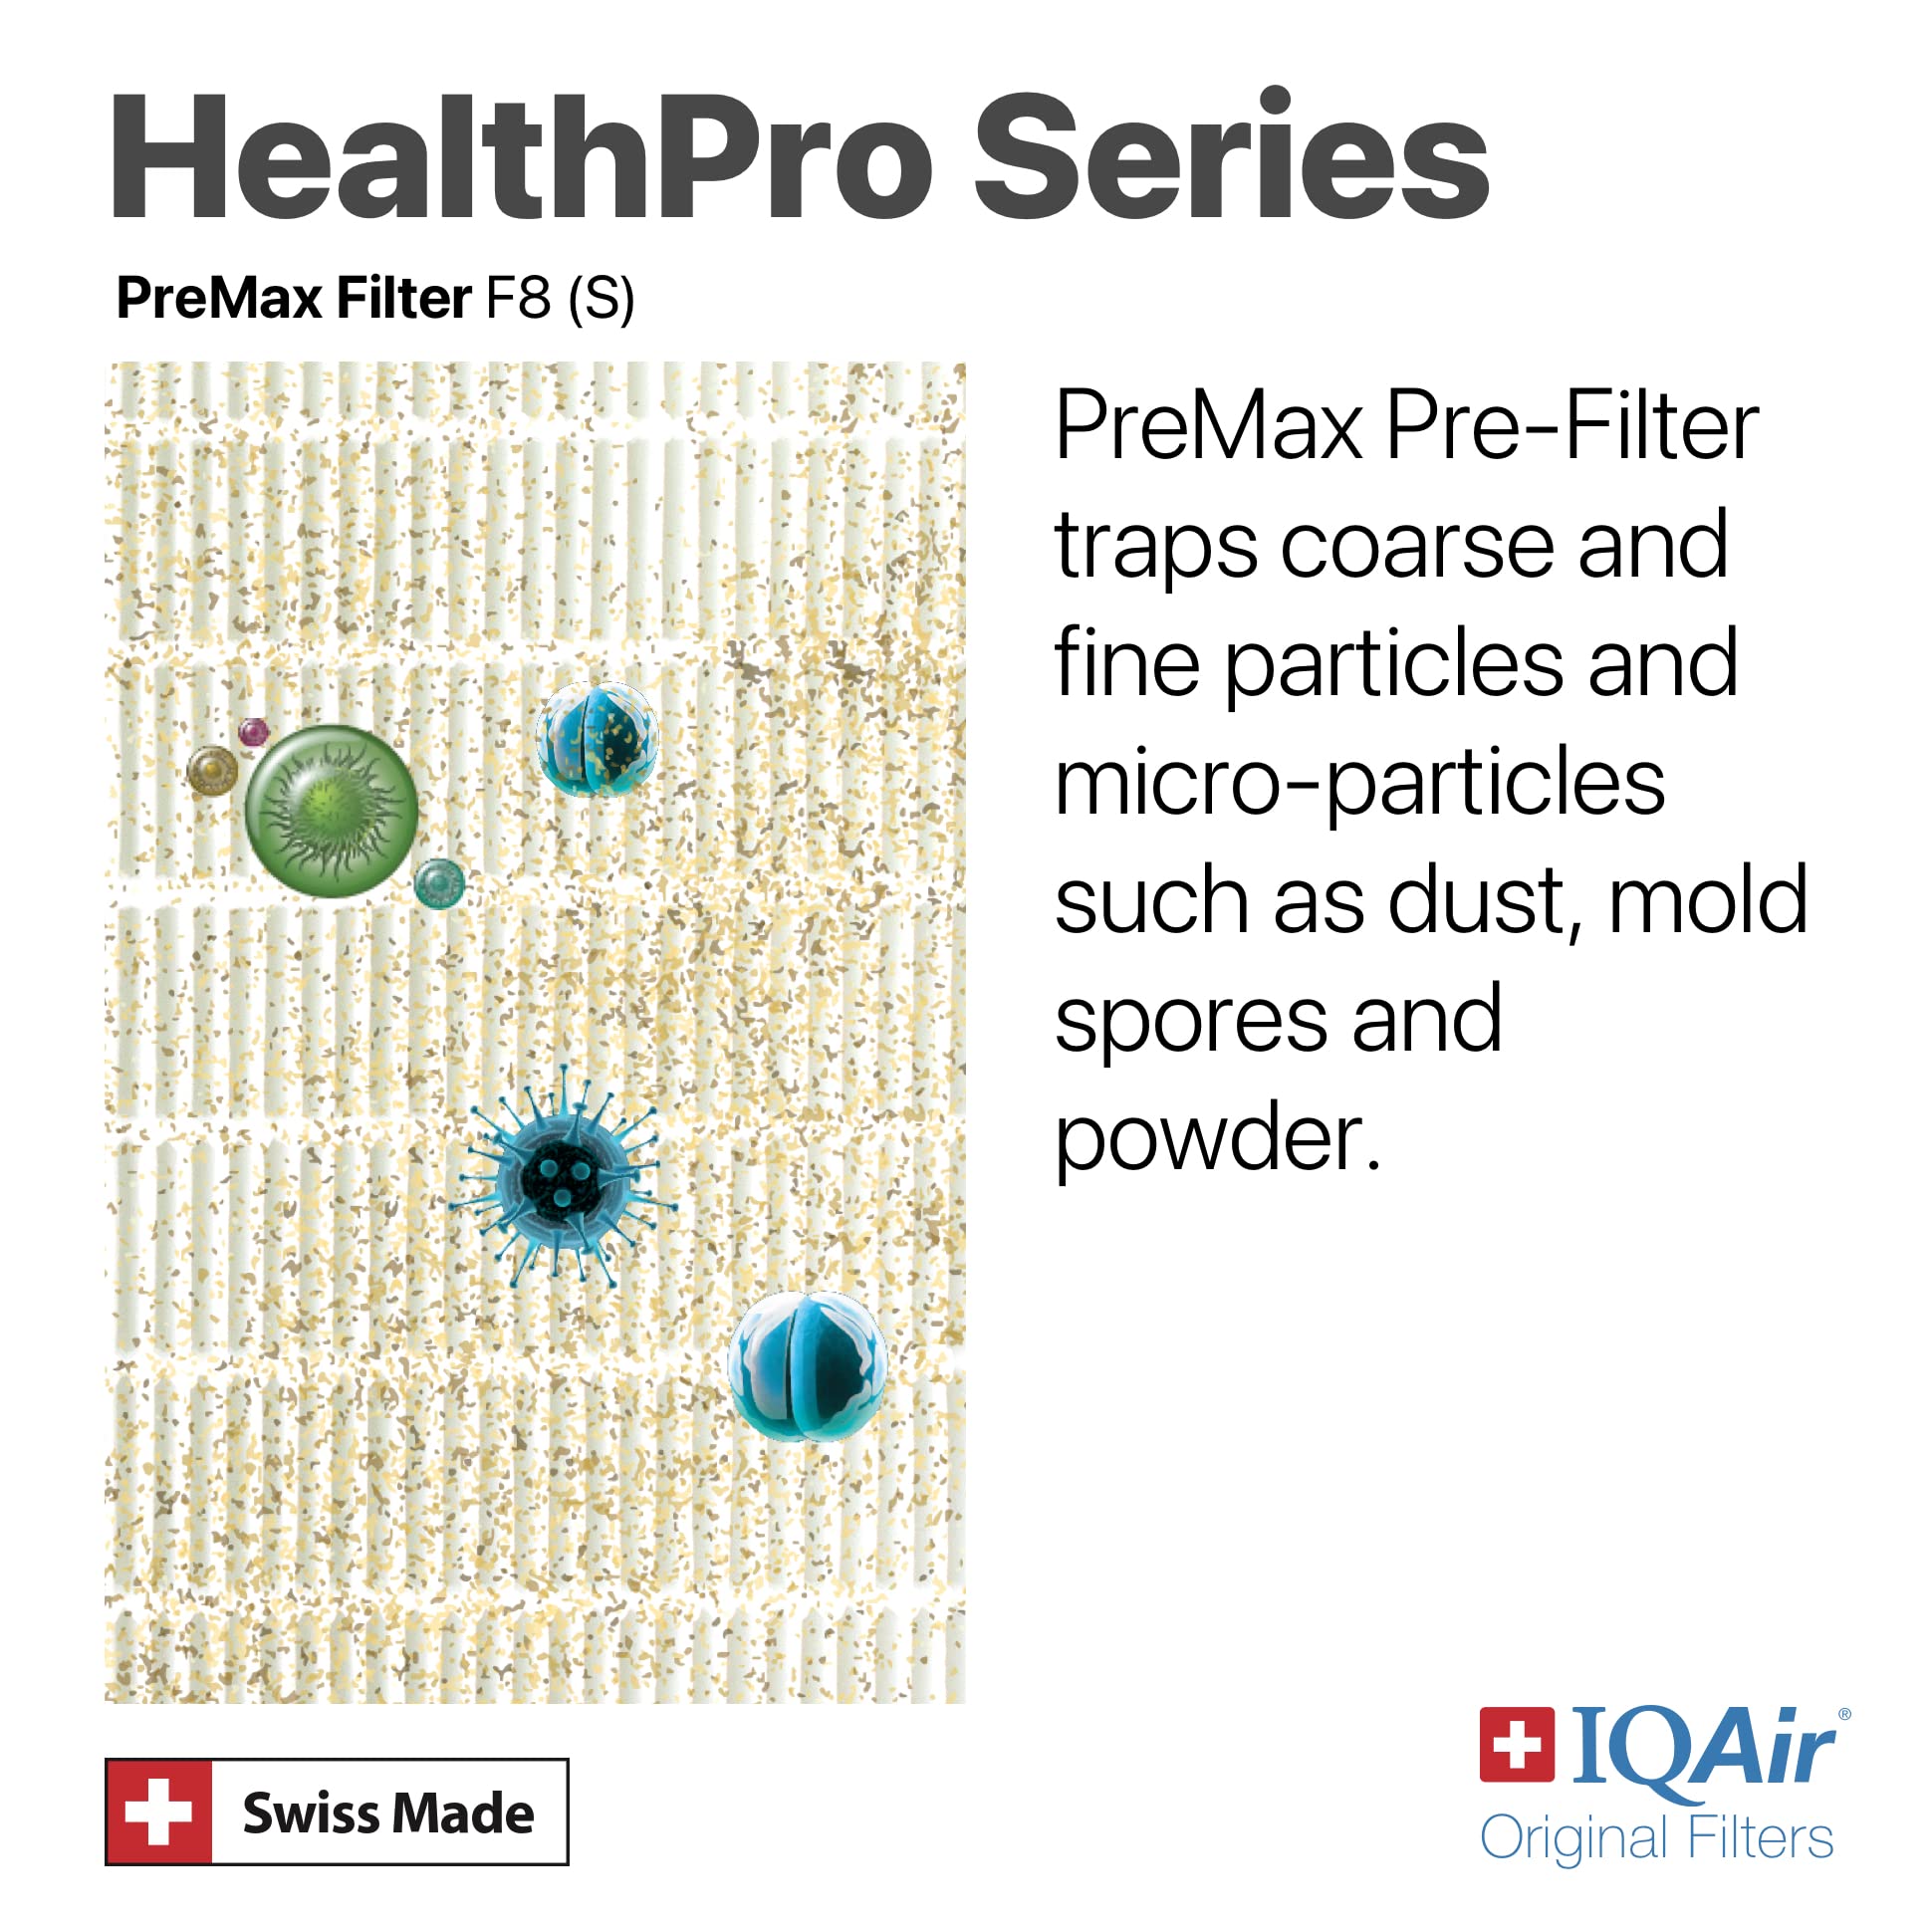 IQAir PreMax Prefilter - Genuine Replacement Air Filter For IQAir HealthPro Series - Controls Coarse and Fine Particles - Dust, Mold Spores, and Powder - Swiss Made Filters For Air Purifiers